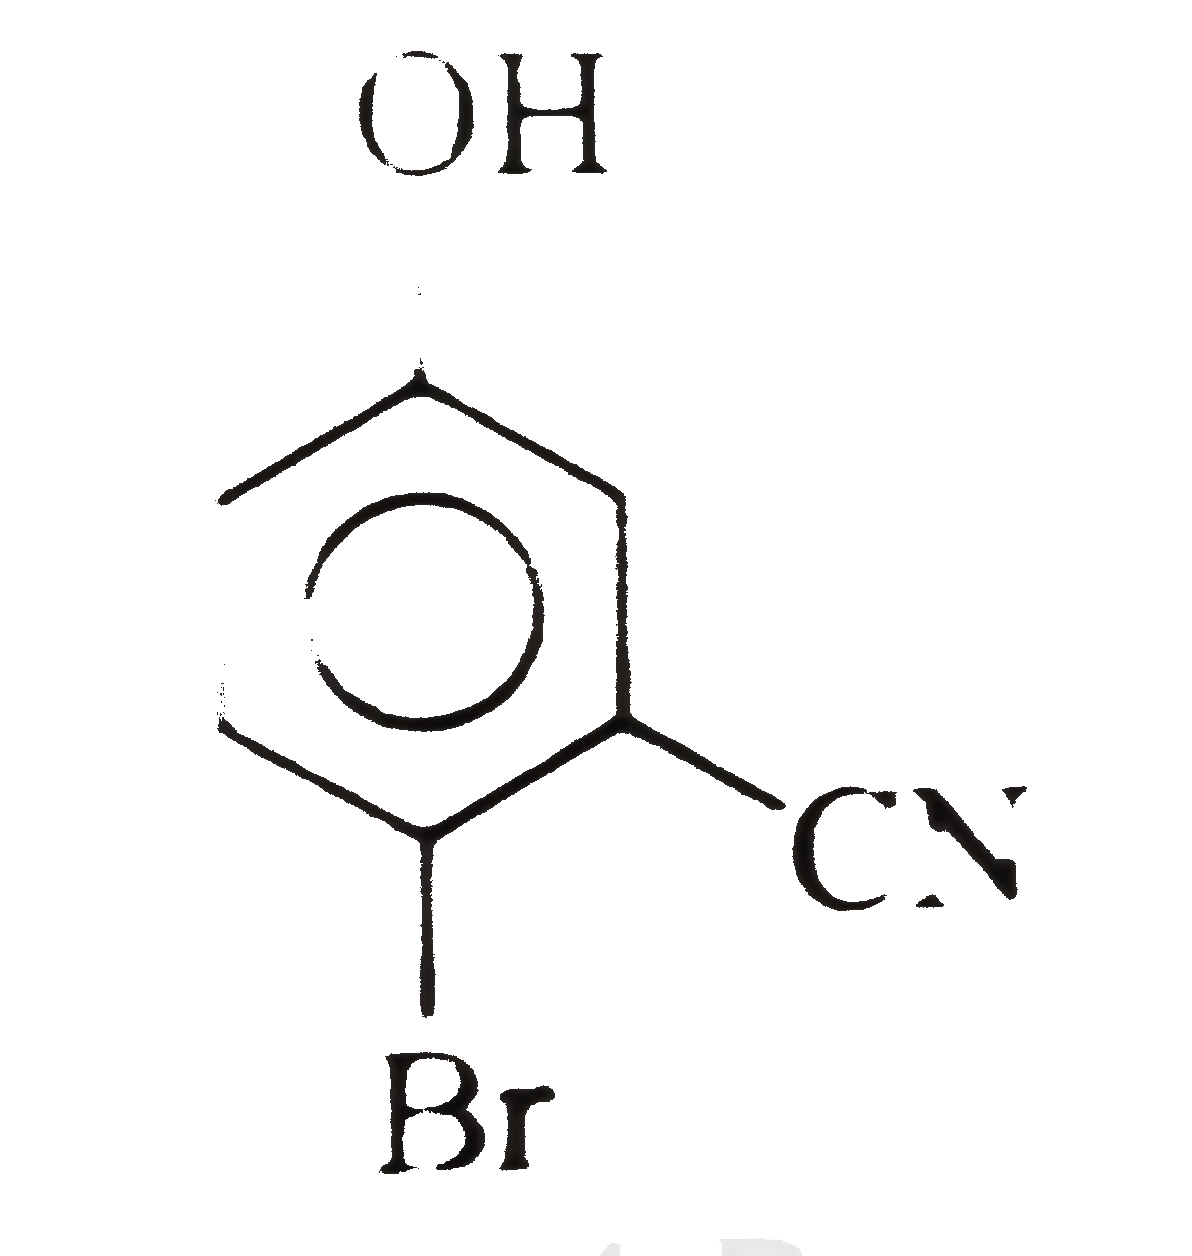 The IUPAC name of the following compound is